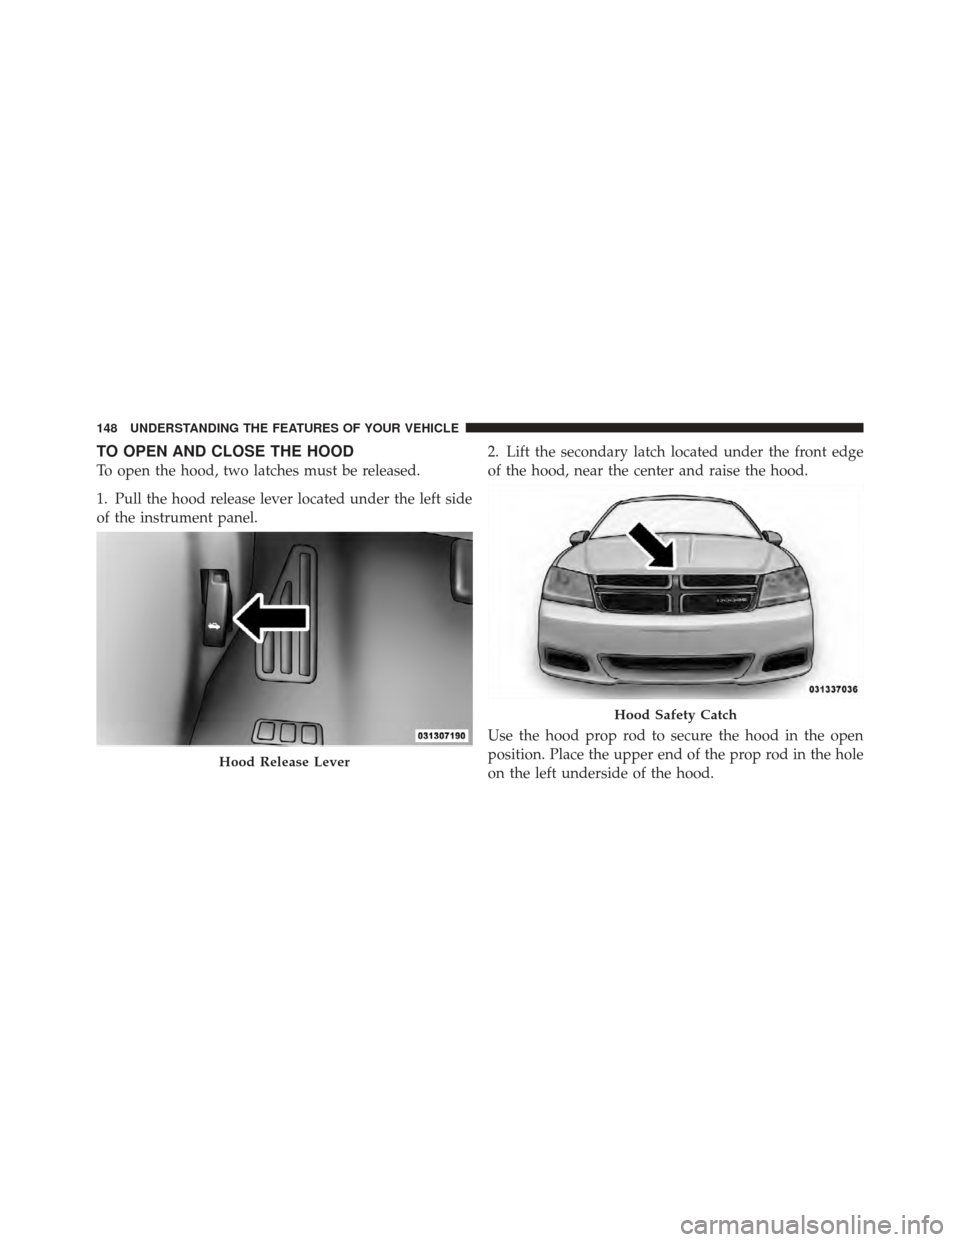 DODGE AVENGER 2012 2.G Owners Manual TO OPEN AND CLOSE THE HOOD
To open the hood, two latches must be released.
1. Pull the hood release lever located under the left side
of the instrument panel.2. Lift the secondary latch located under 